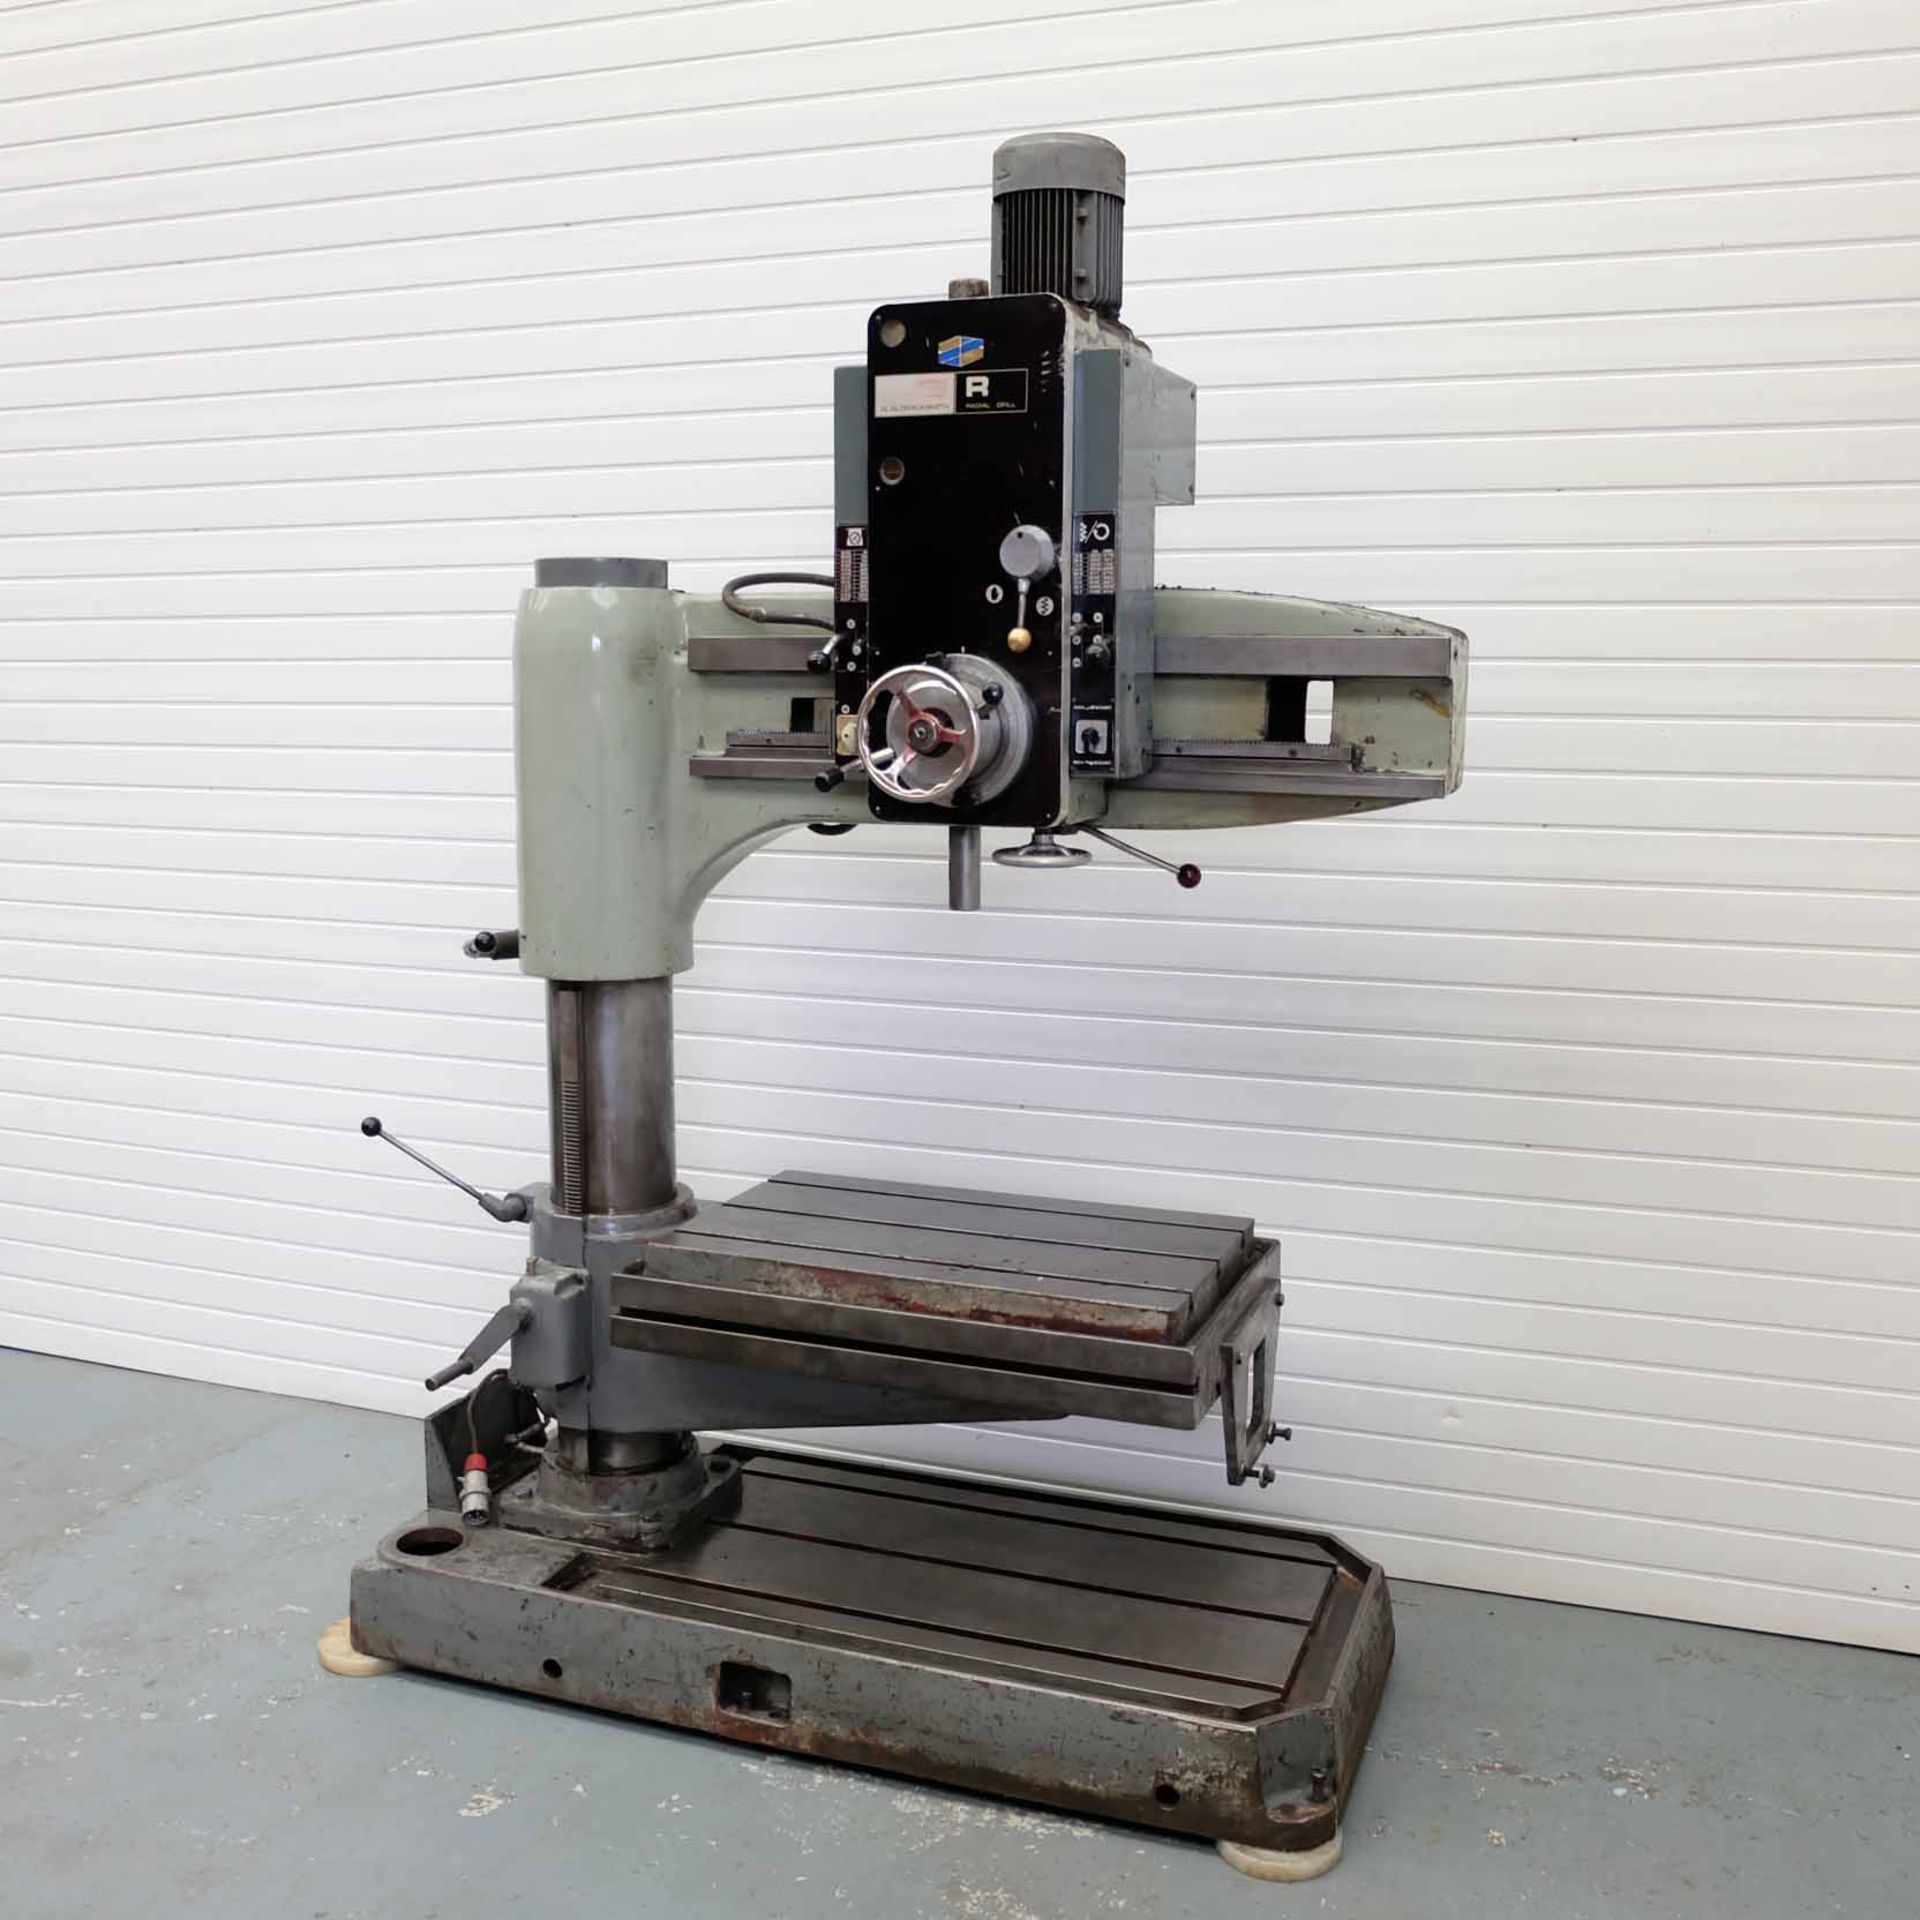 Q&S R4 Radial Arm Drill. Arm Radius 4'. Spindle Size 4MT. Table Size 35 3/4" x 21". Spindle Speeds 6 - Image 2 of 11